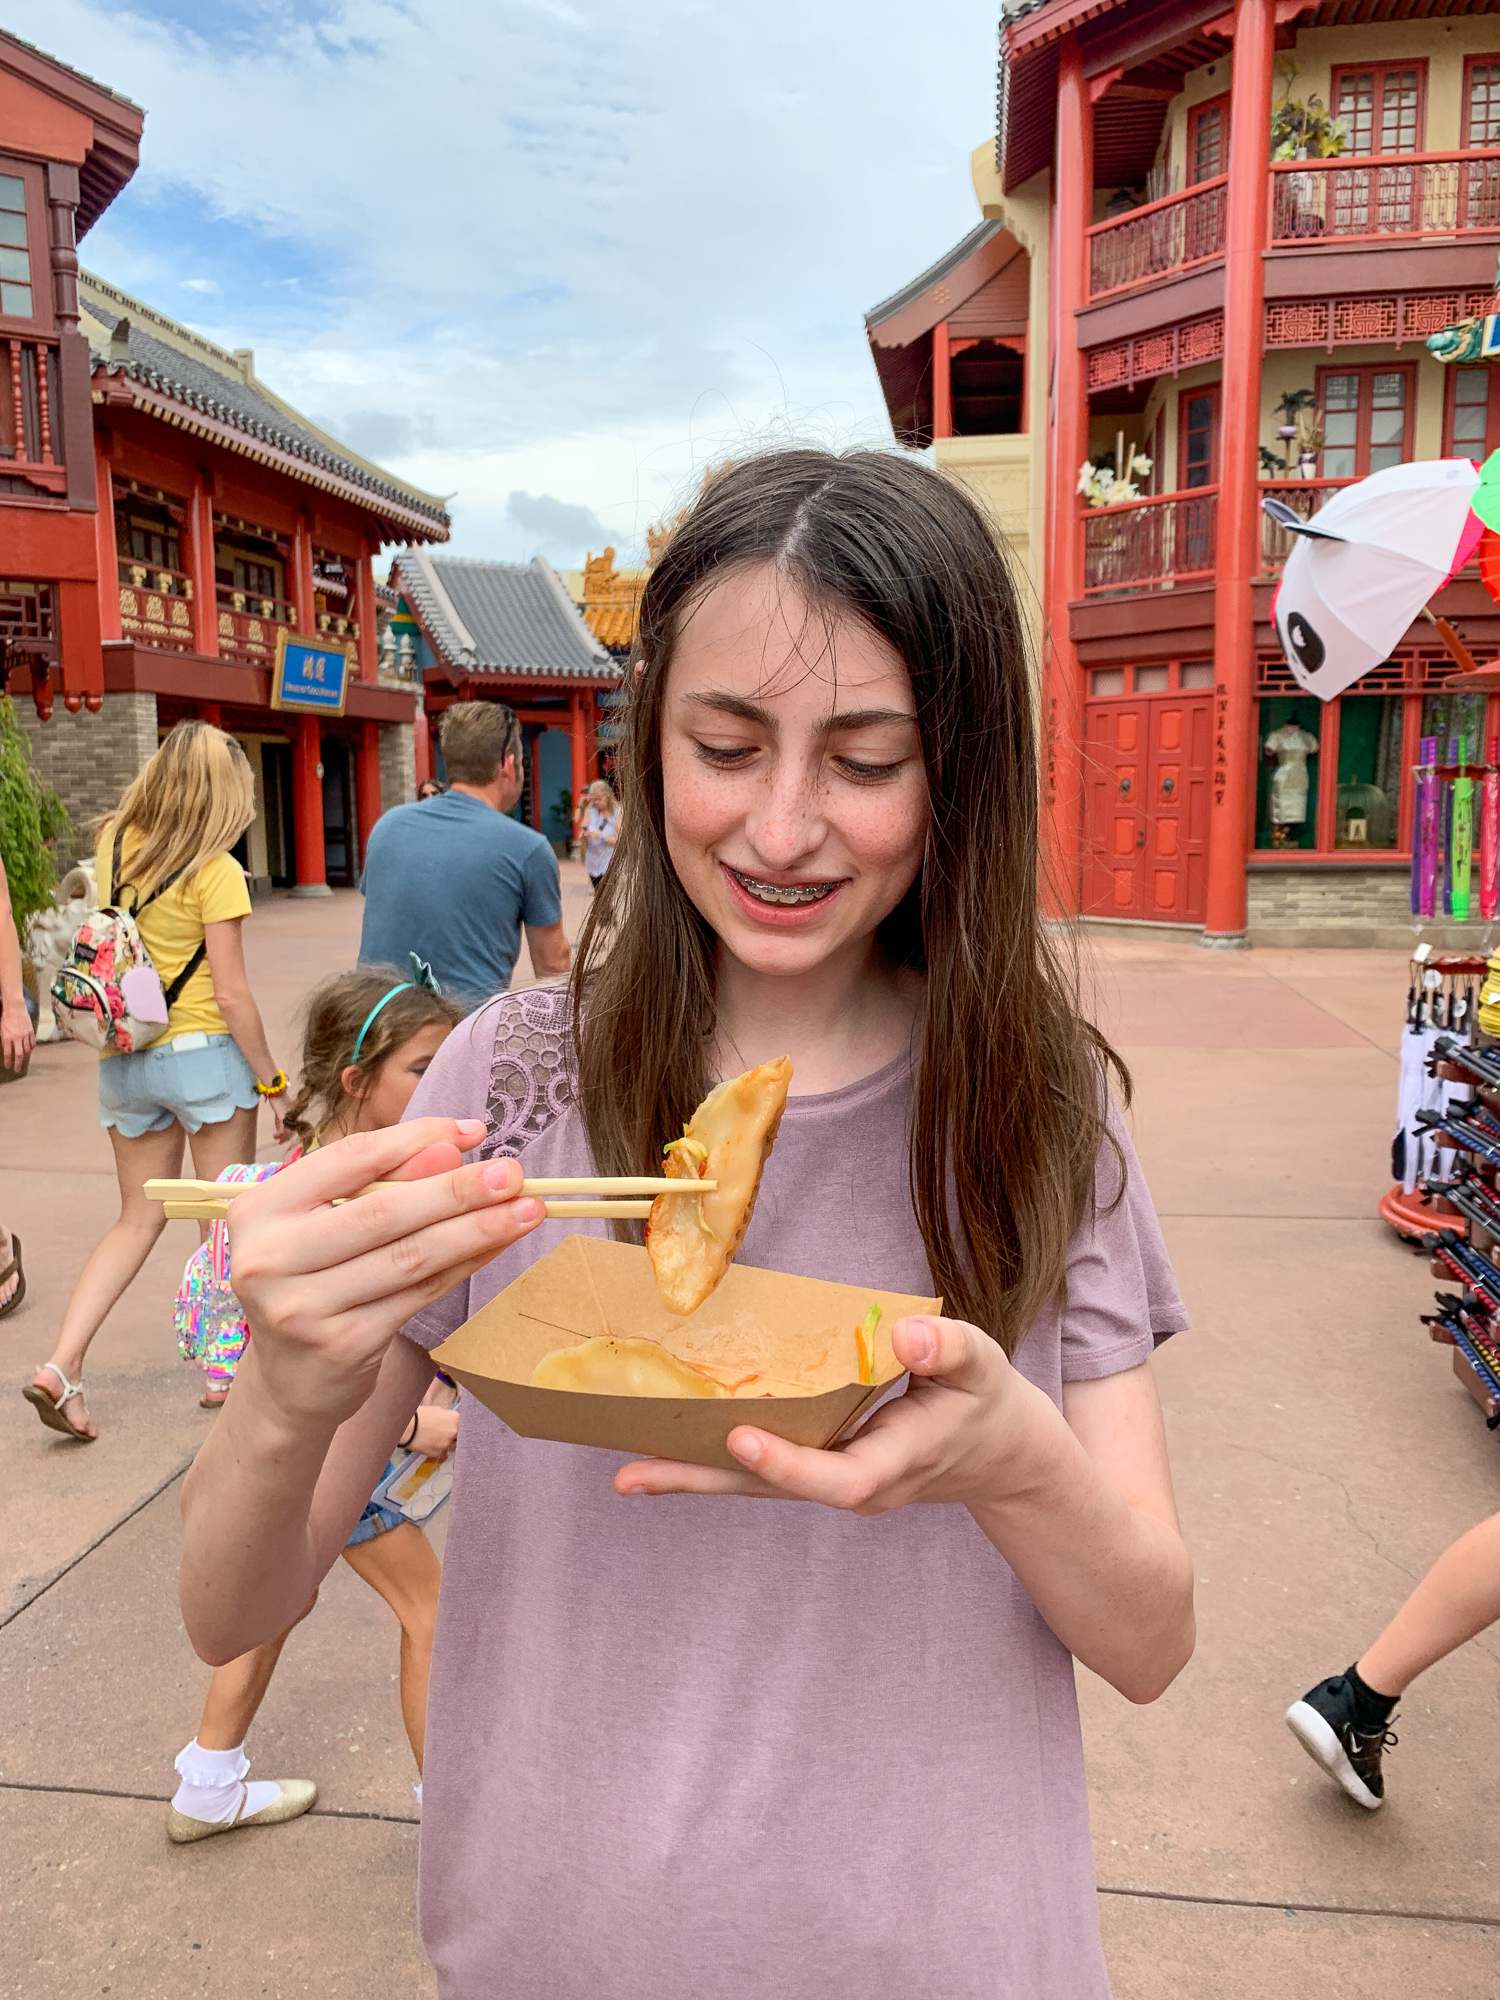 Teen eating dumplings in the China Pavilion at Epcot